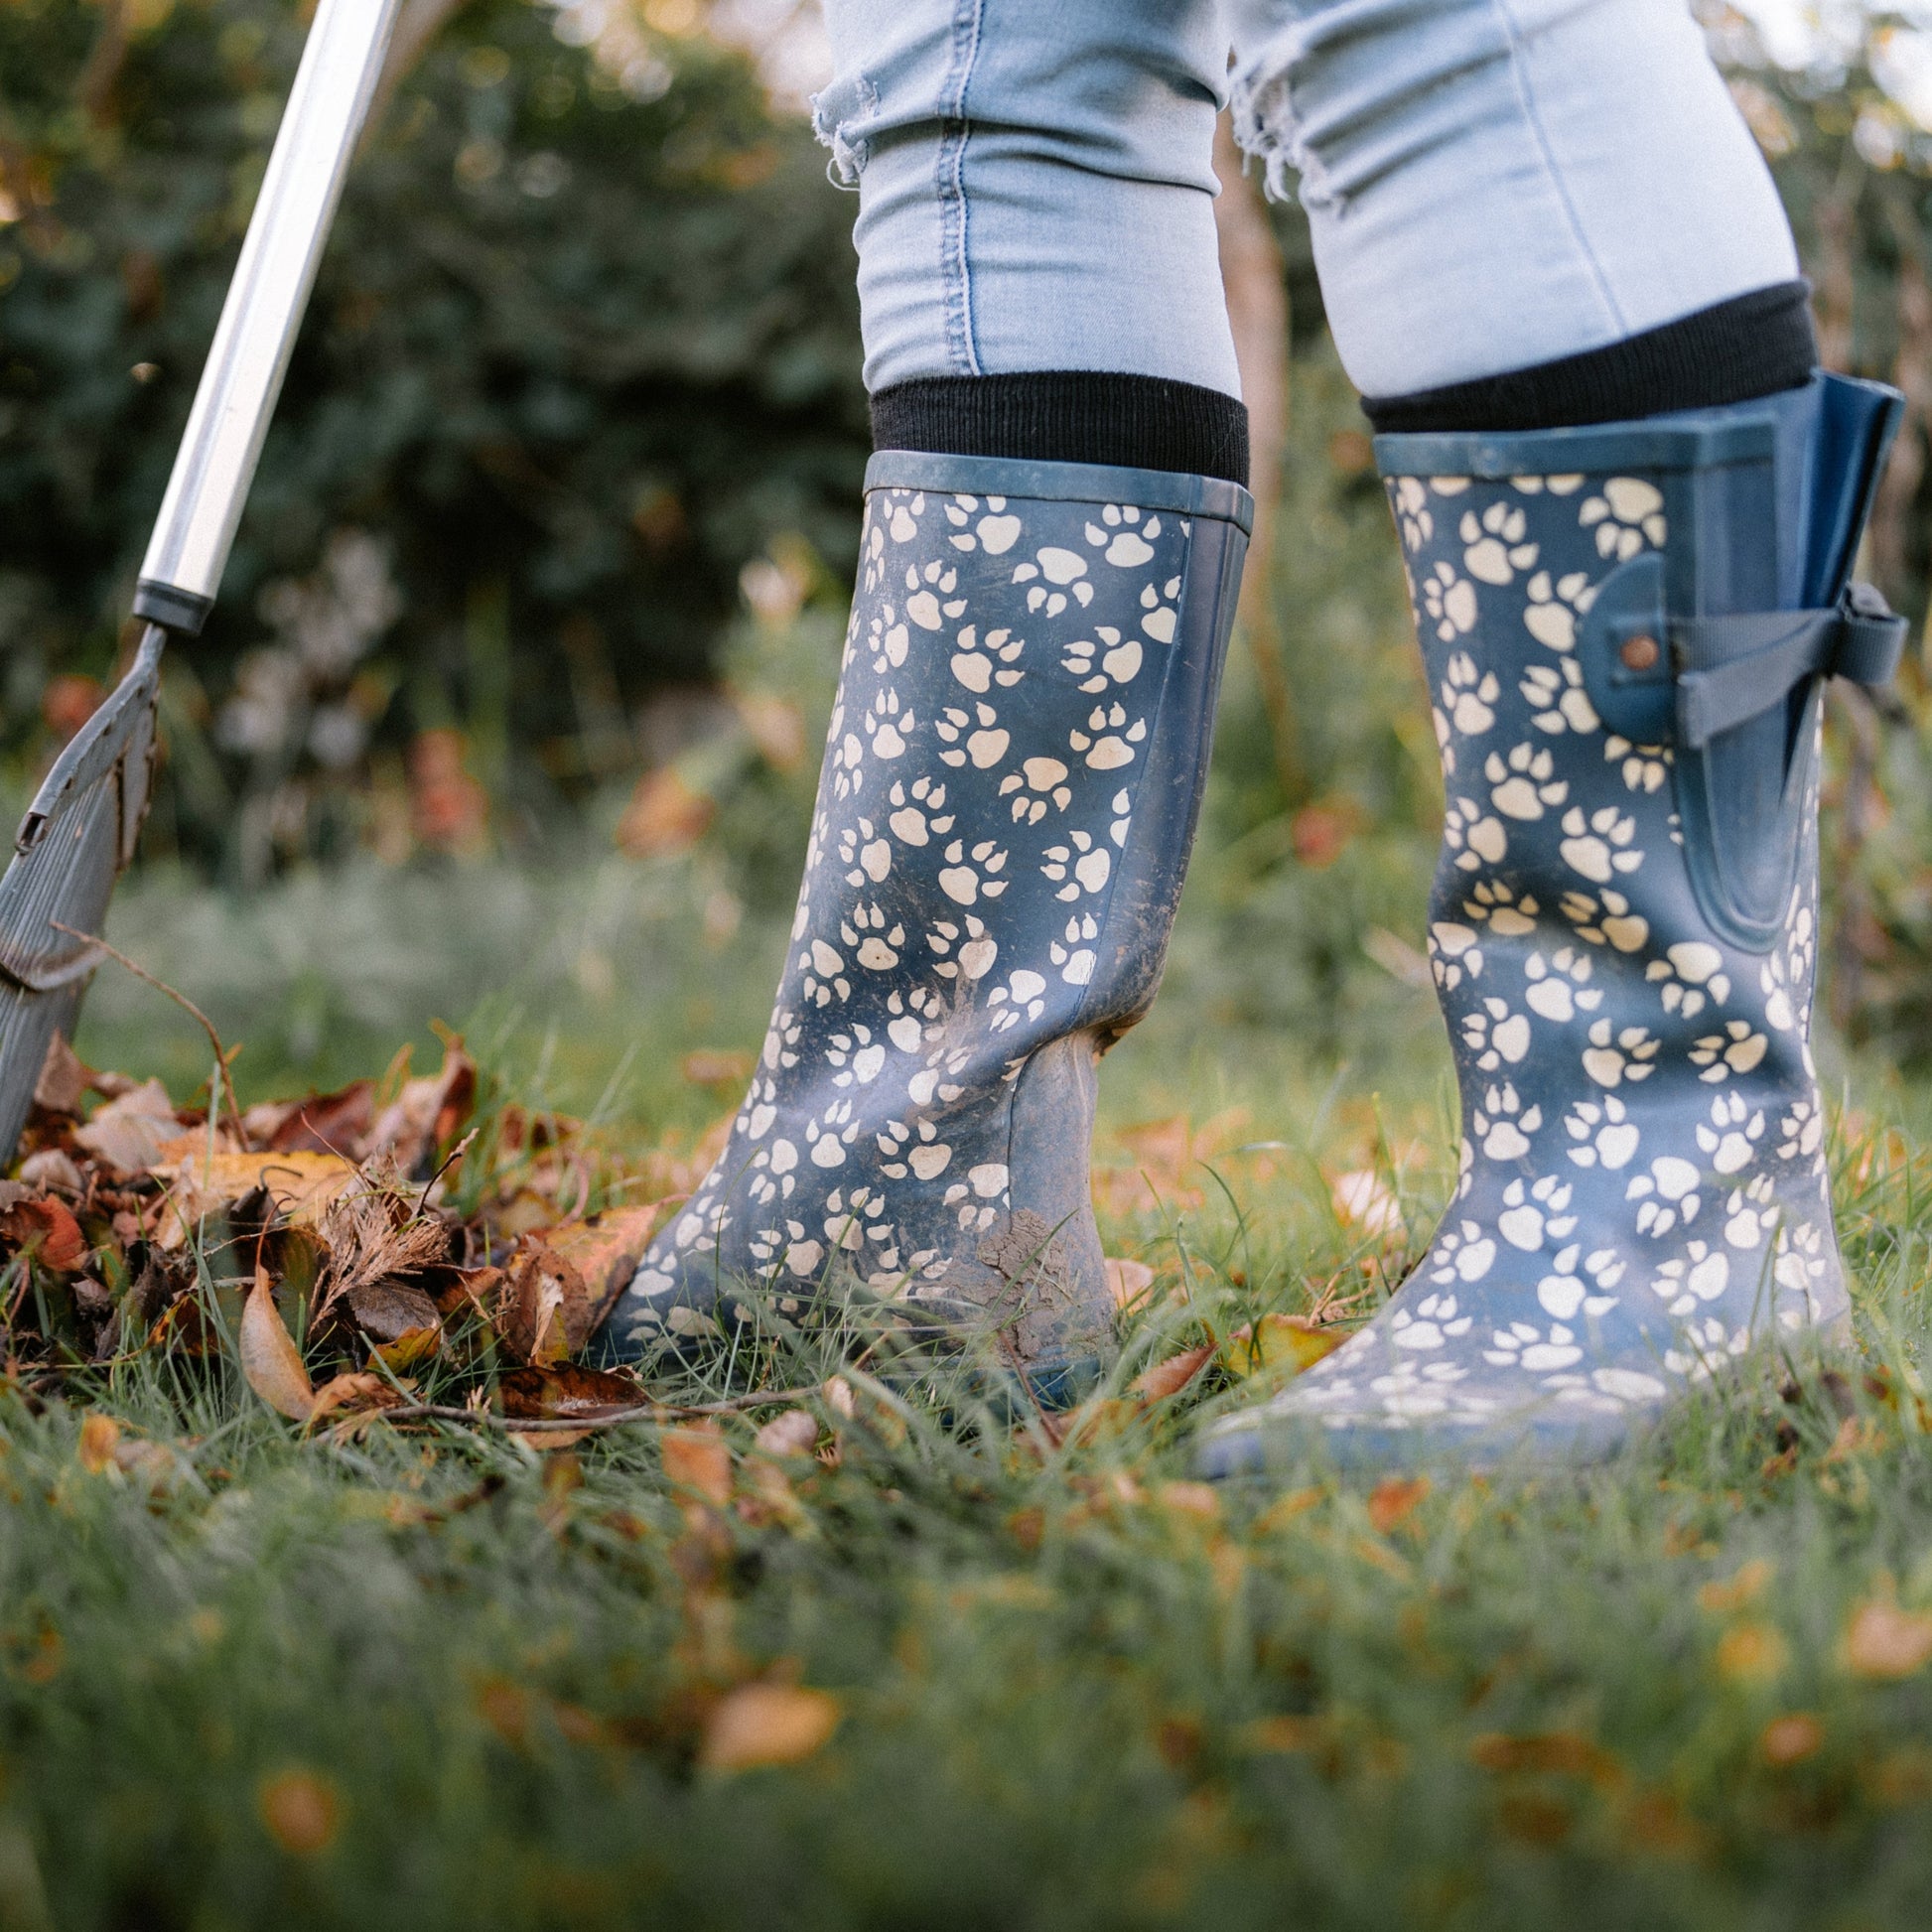 wellies for sweeping leaves